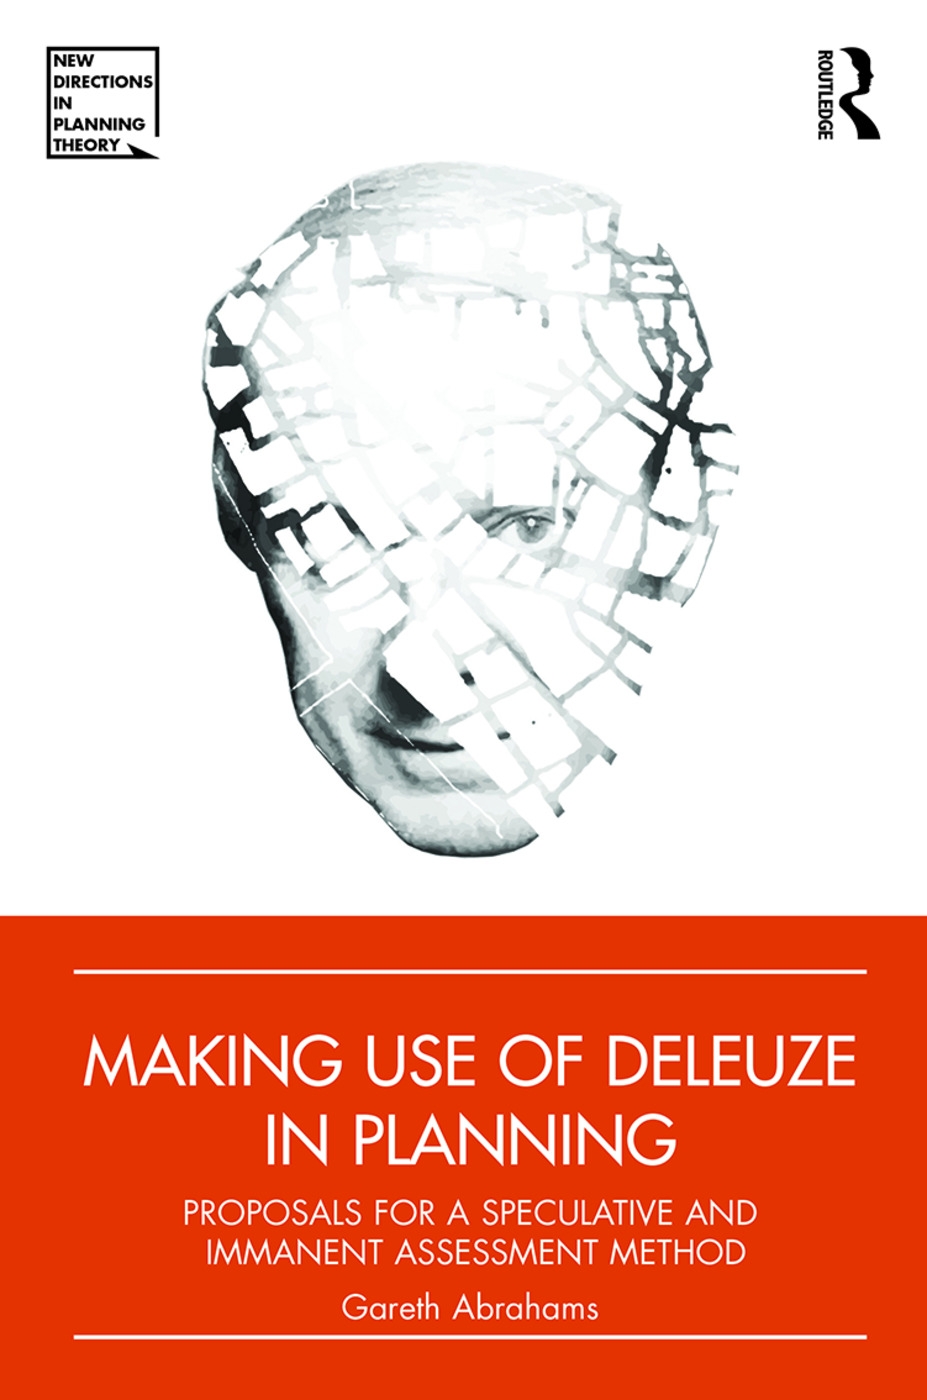 Making Use of Deleuze in Planning: Proposals for a Speculative and Immanent Assessment Method